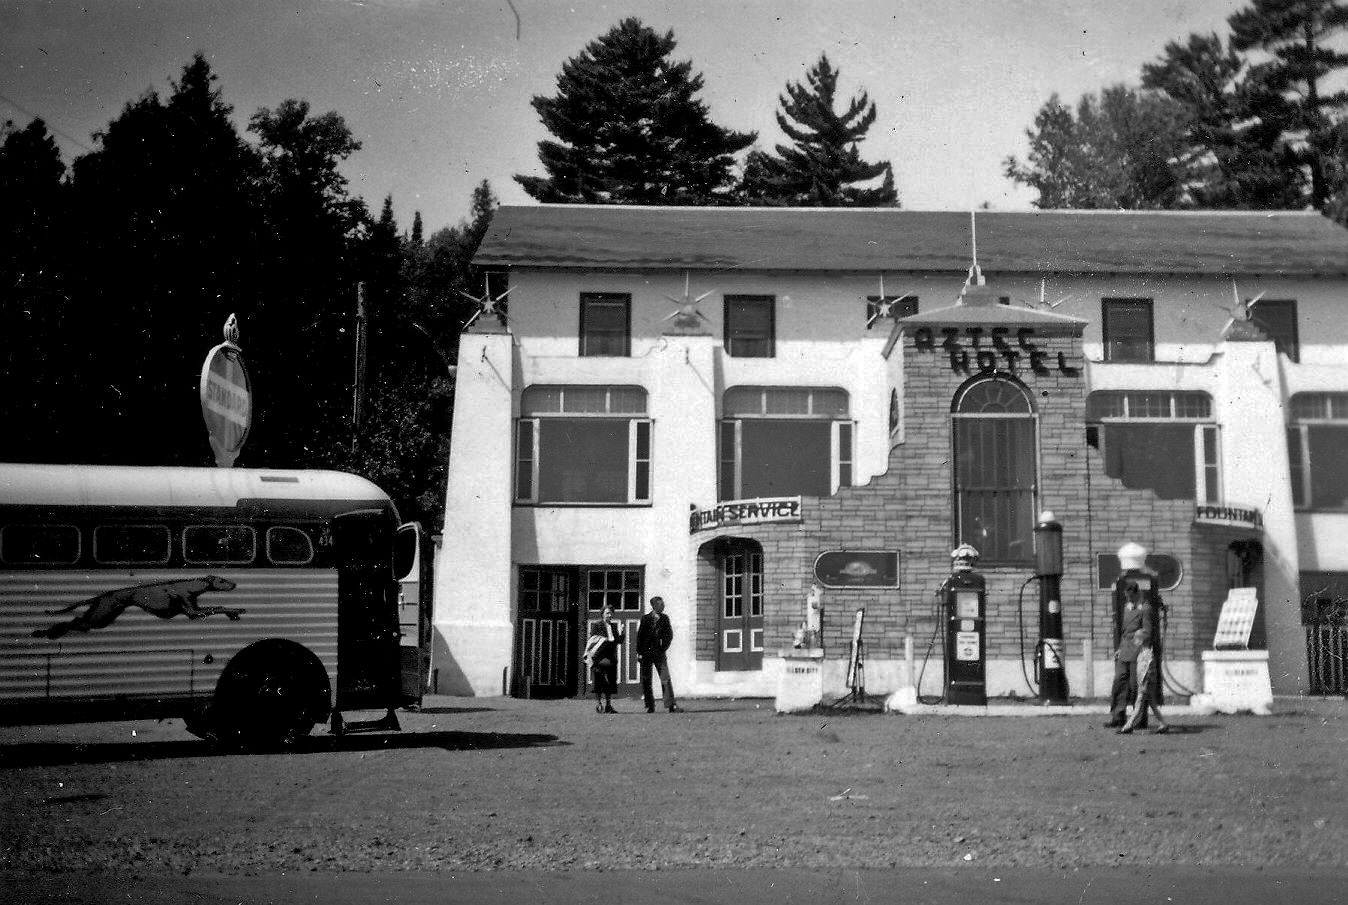 My father and I are in the picture in front of the gas pump on the right in 1949 when I was five. The Aztec Hotel with its memorable soda fountain was about half way between Fort William (now Thunder Bay), Ontario and Duluth, MN. The main highway is 61 and the turn off at the Aztec is Hwy 1. You would turn here to go to Ely, MN. This drive along Lake Superior is noted for its exquisite scenery. We traveled many times from Fort William to Duluth and Minneapolis on the Greyhound when I was a child.  This place burned down many years ago but I remember it well as the Greyhound rest stop with the best cherry cokes around. View full size.